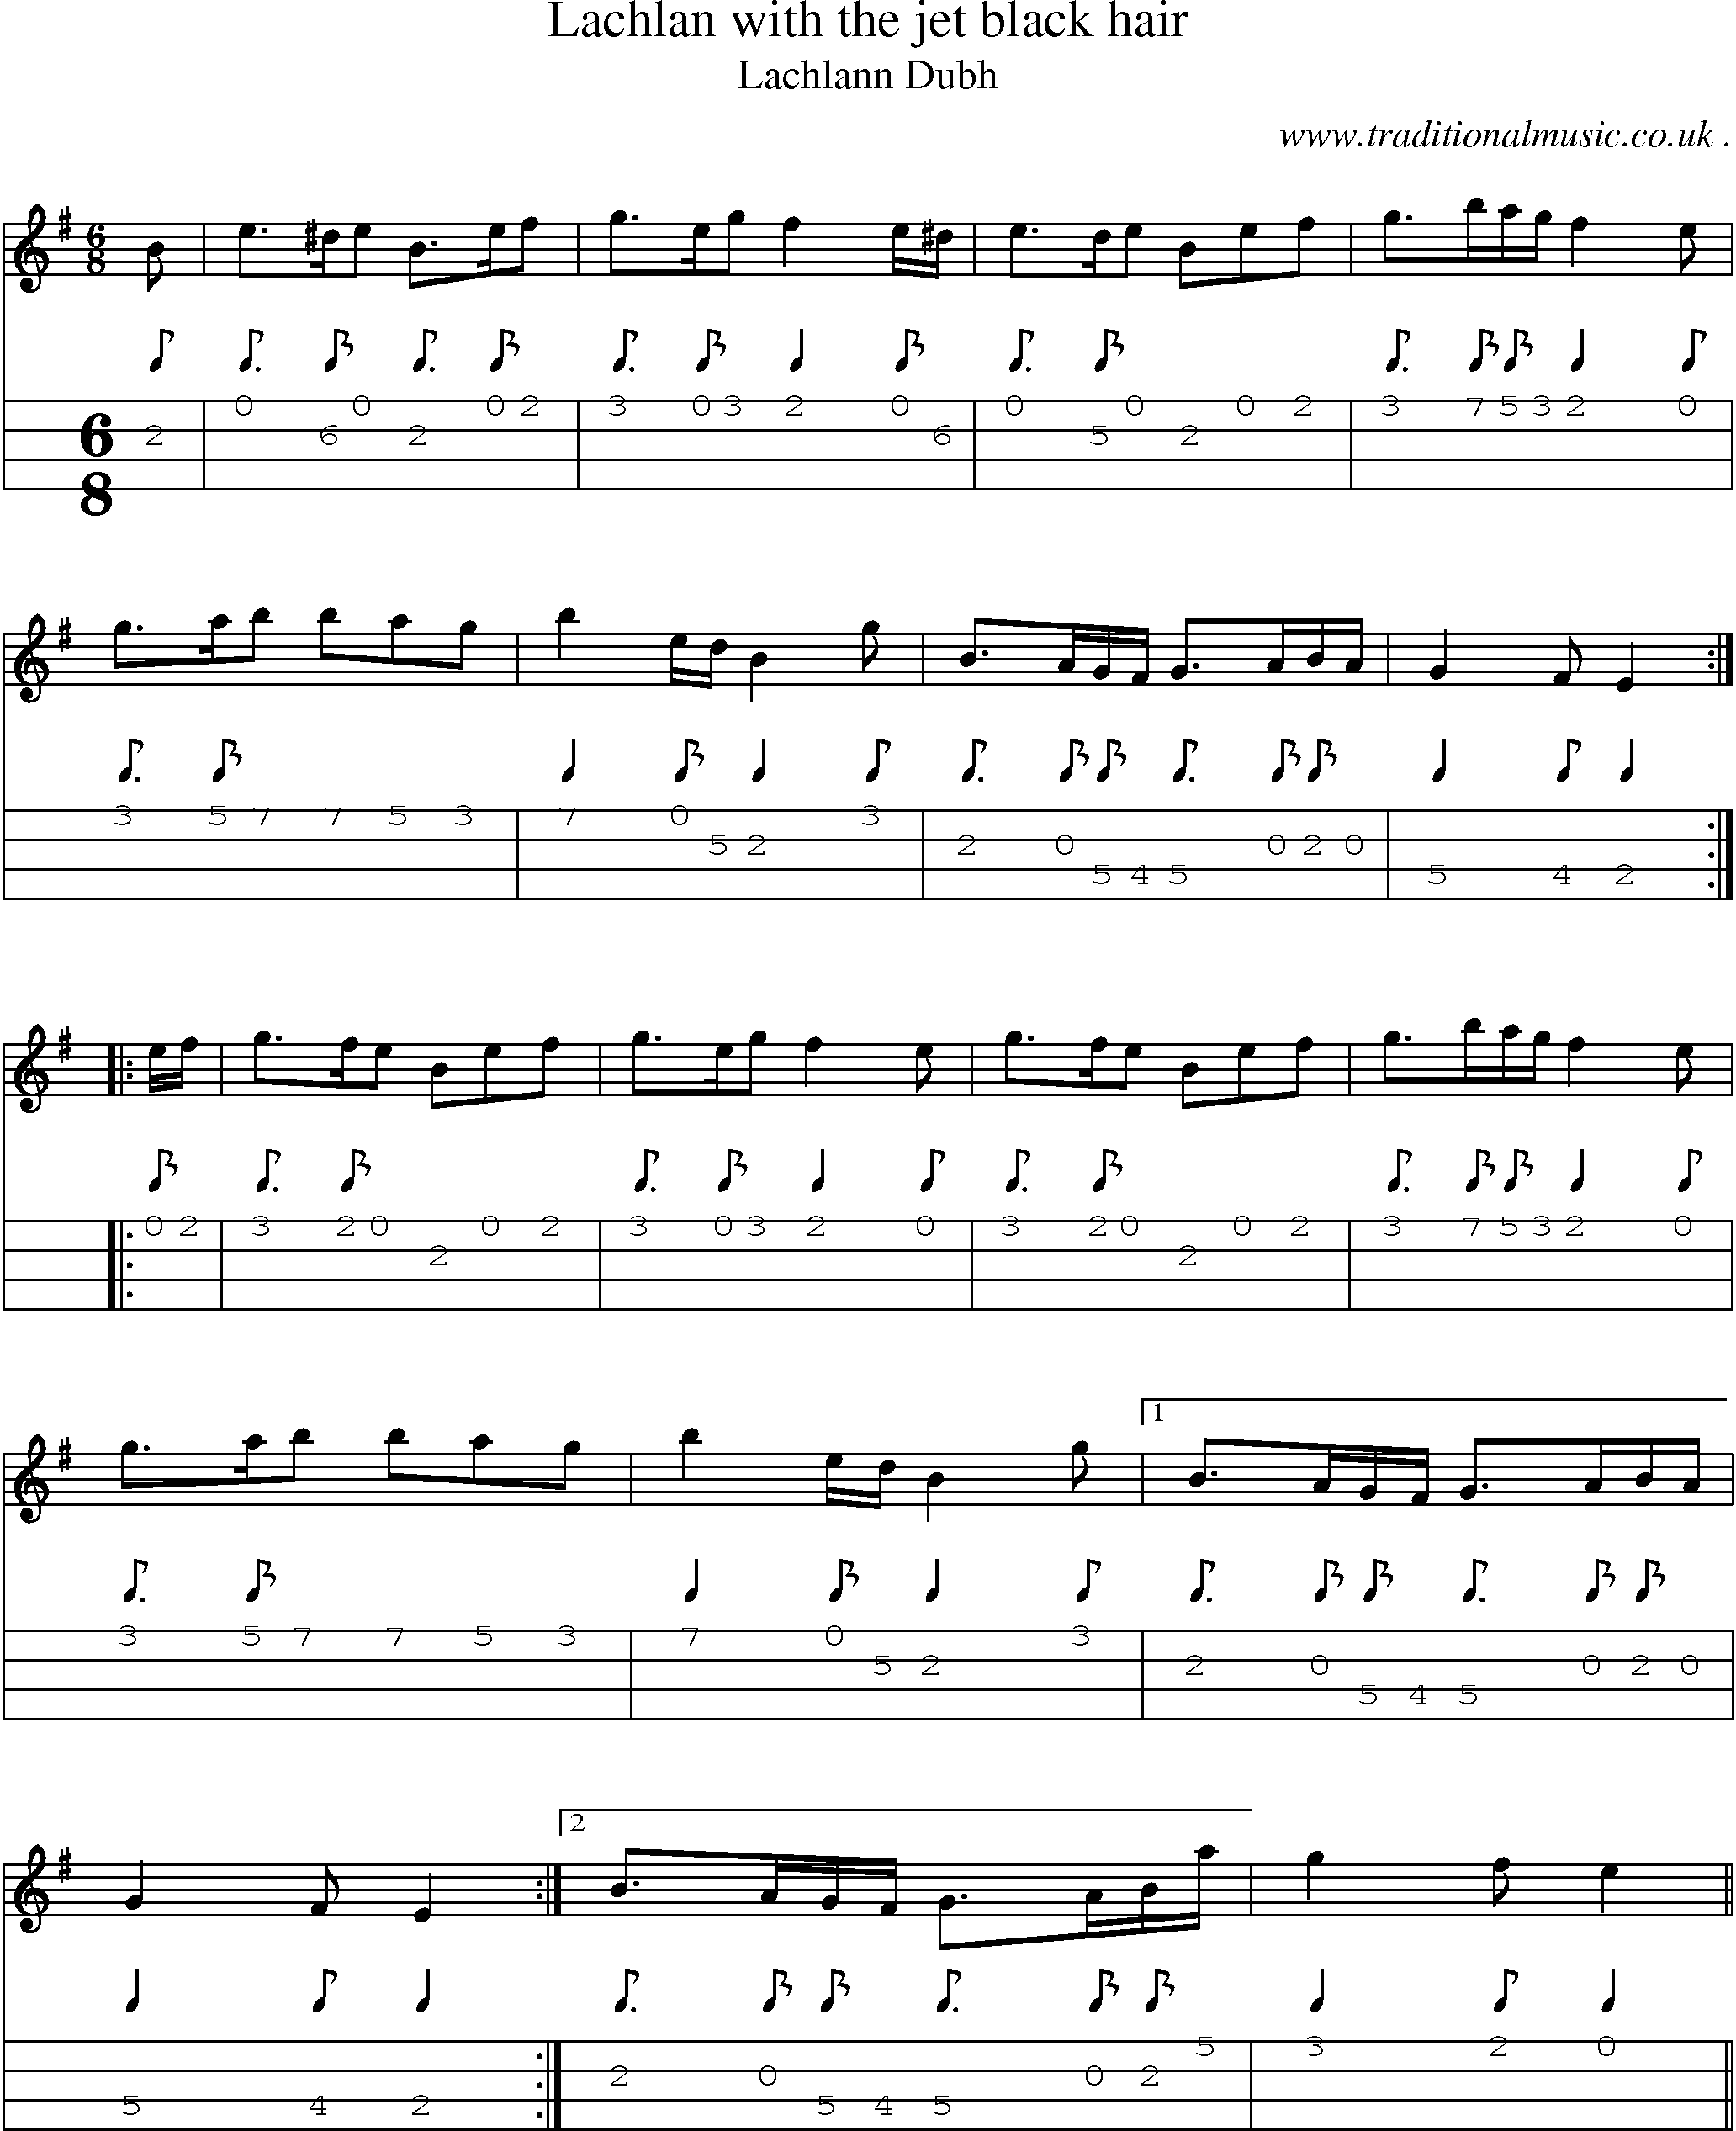 Sheet-music  score, Chords and Mandolin Tabs for Lachlan With The Jet Black Hair